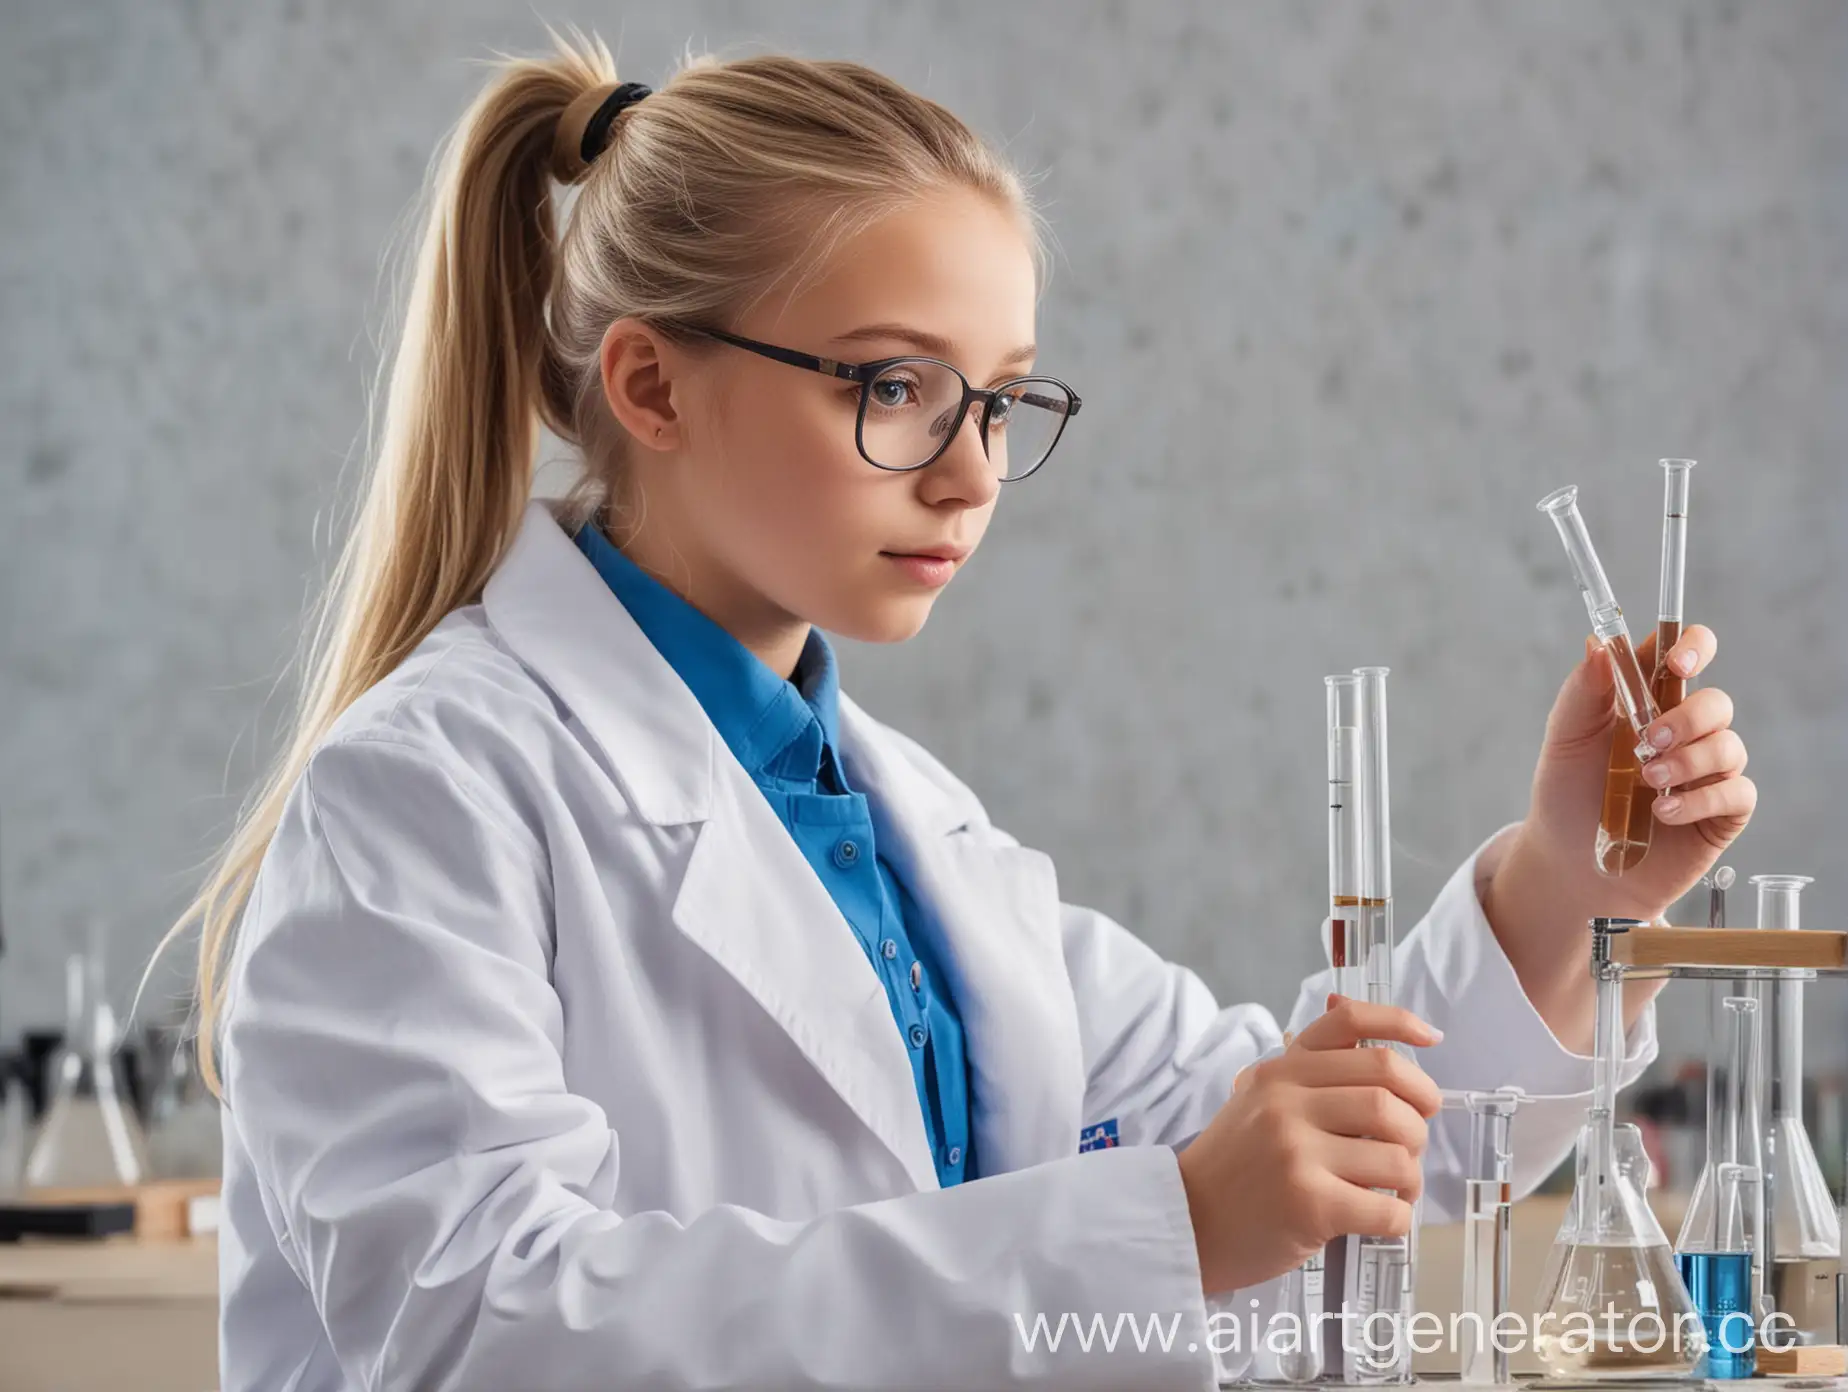 young girl in the classroom, chemistry lesson, white coat, glasses, blonde, ponytail hairstyle, flasks, test tubes, laboratory, blue T-shirt